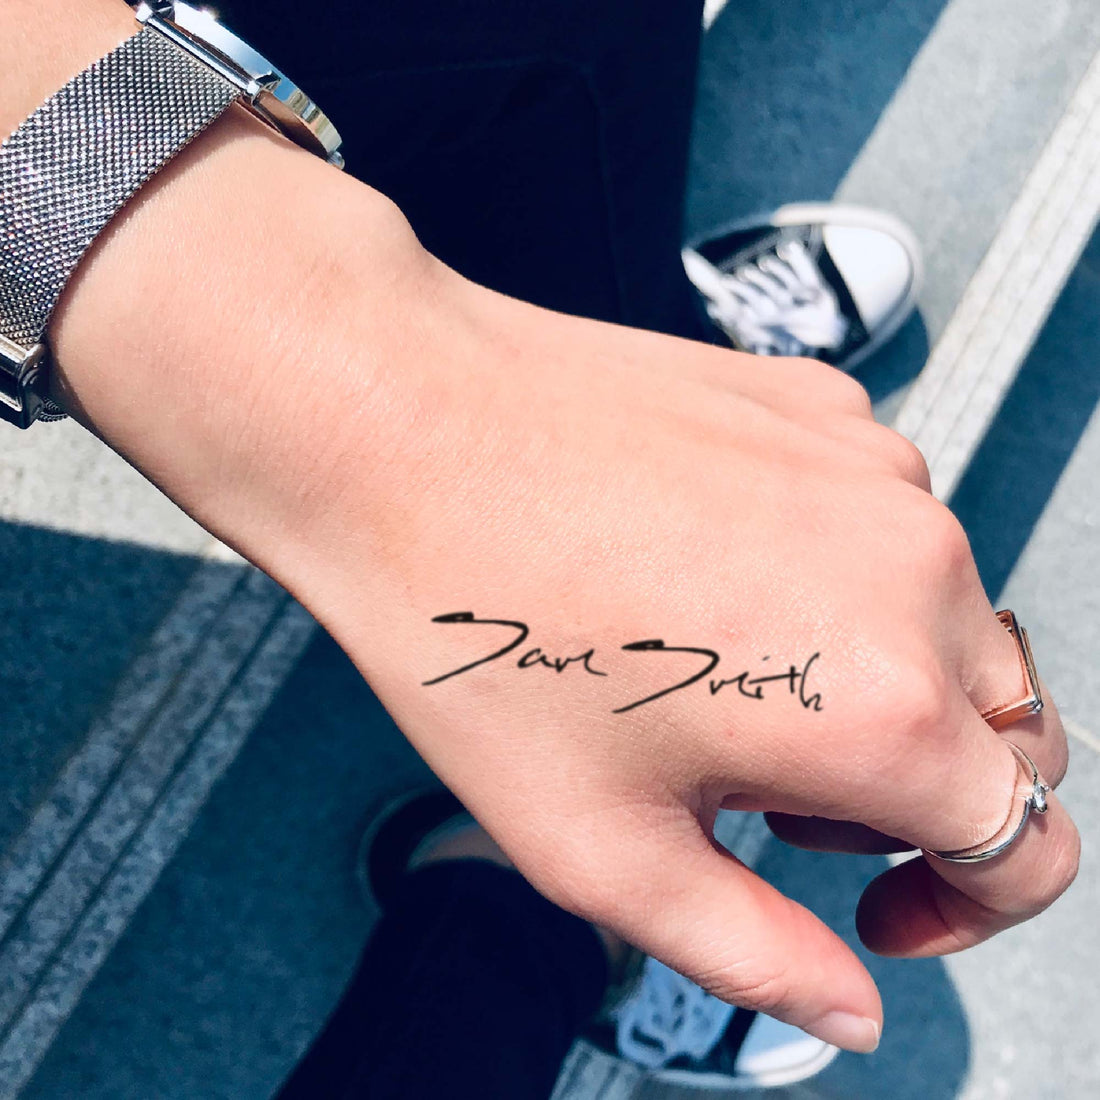 Sam Smith custom temporary tattoo sticker design idea inspiration meanings removal arm wrist hand words font name signature calligraphy lyrics tour concert outfits merch accessory gift souvenir costumes wear dress up code